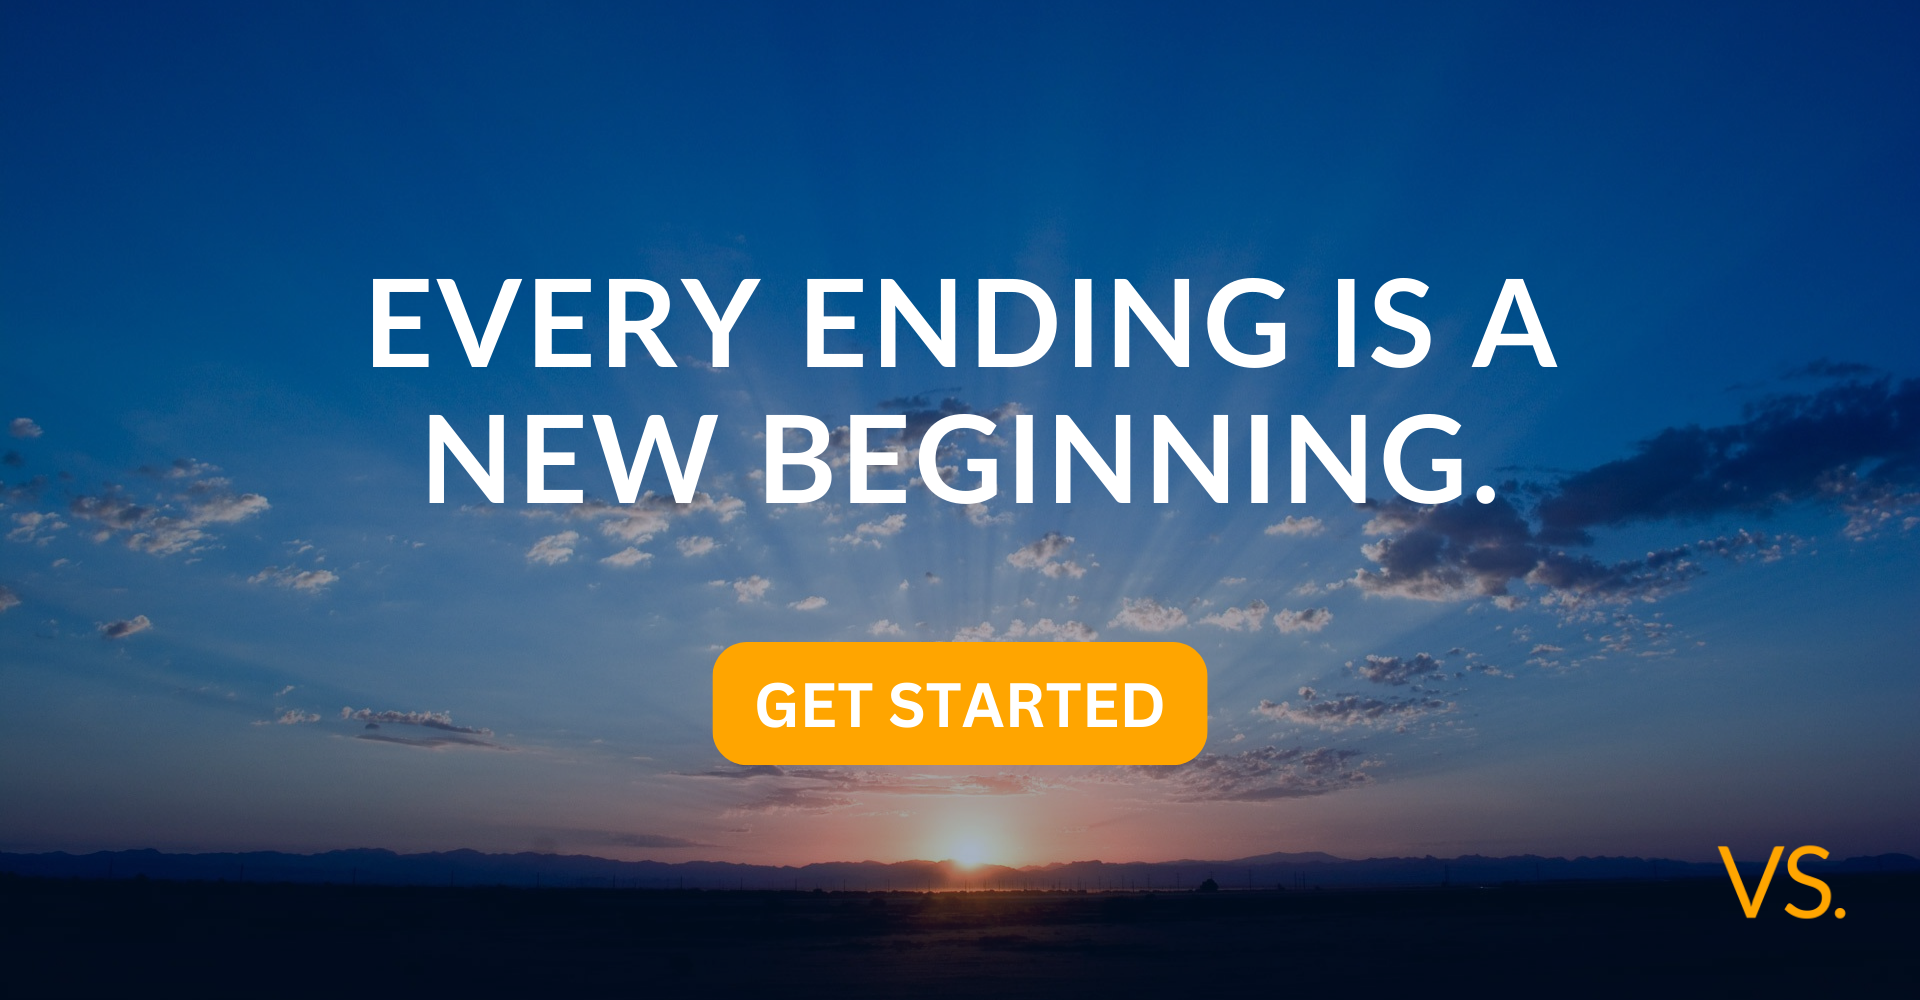 Our lawyers make sure that every ending is a new beginning.